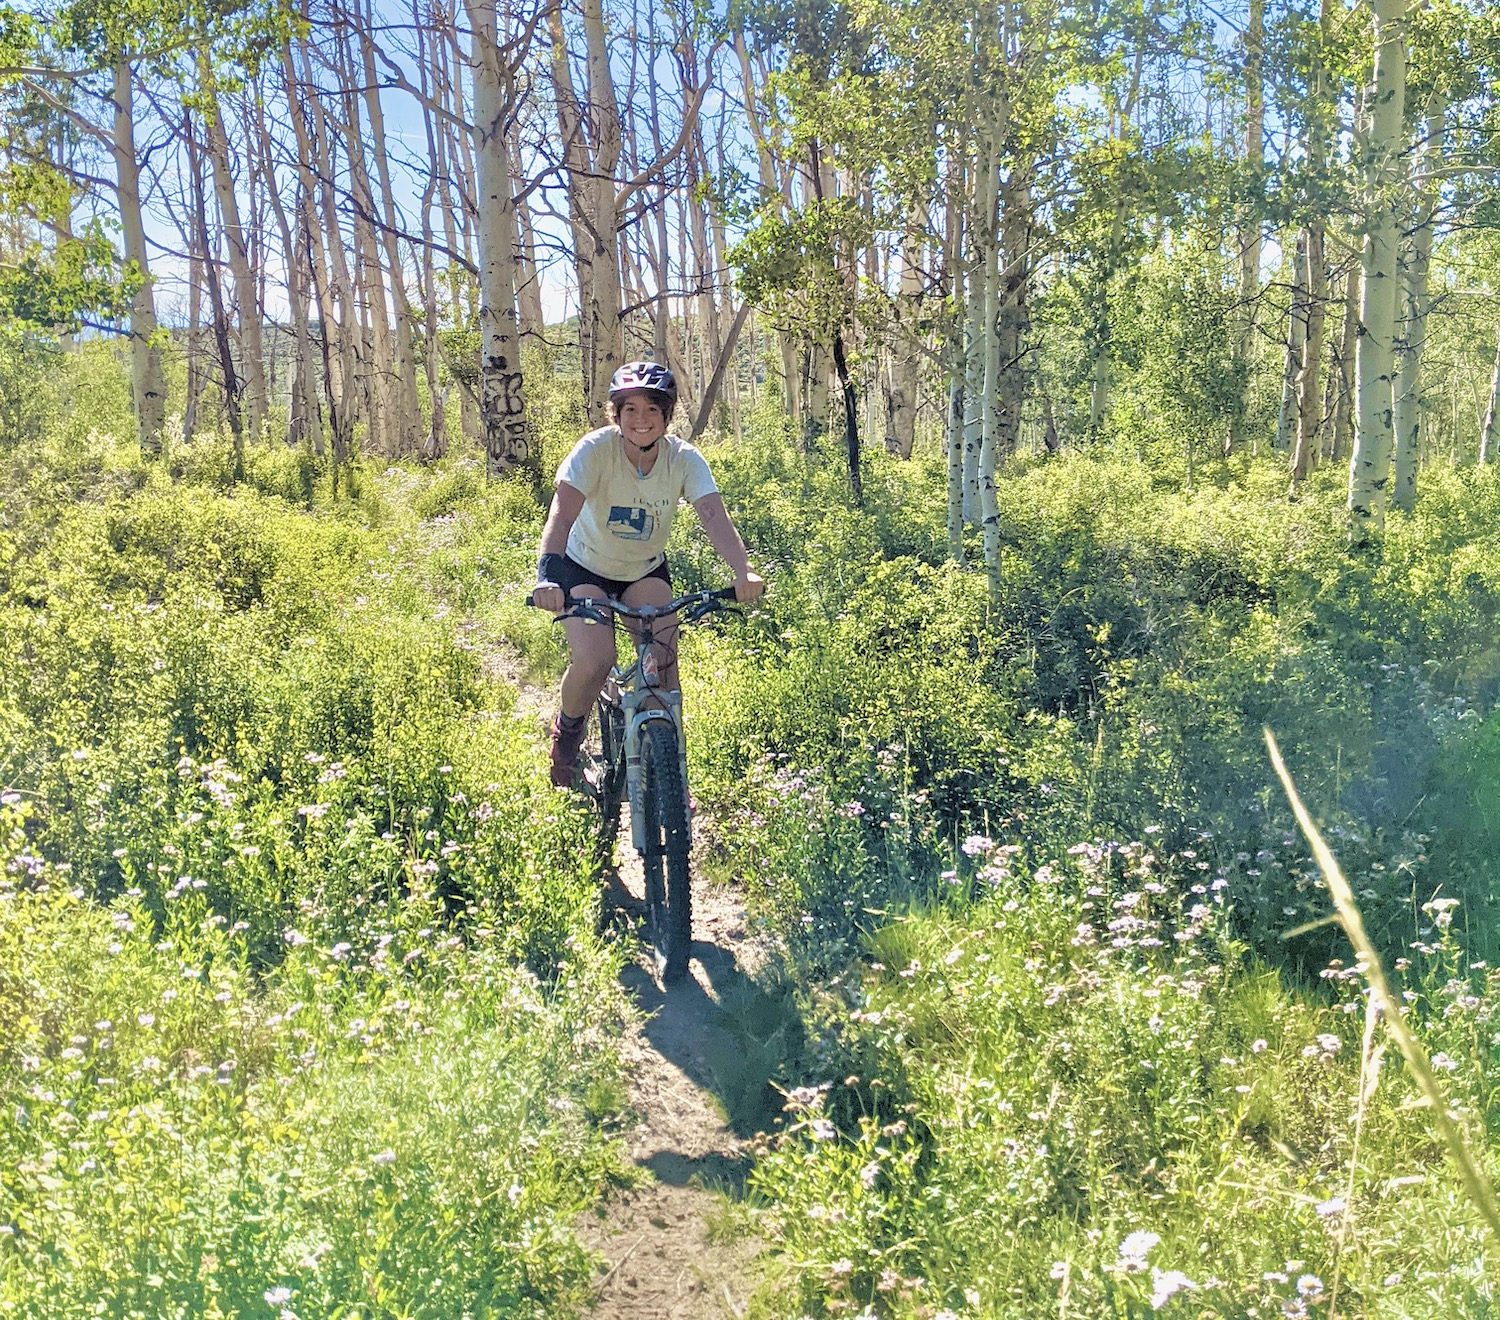 A mountain biker bikes through a field of flowers and aspen trees. They're smiling.